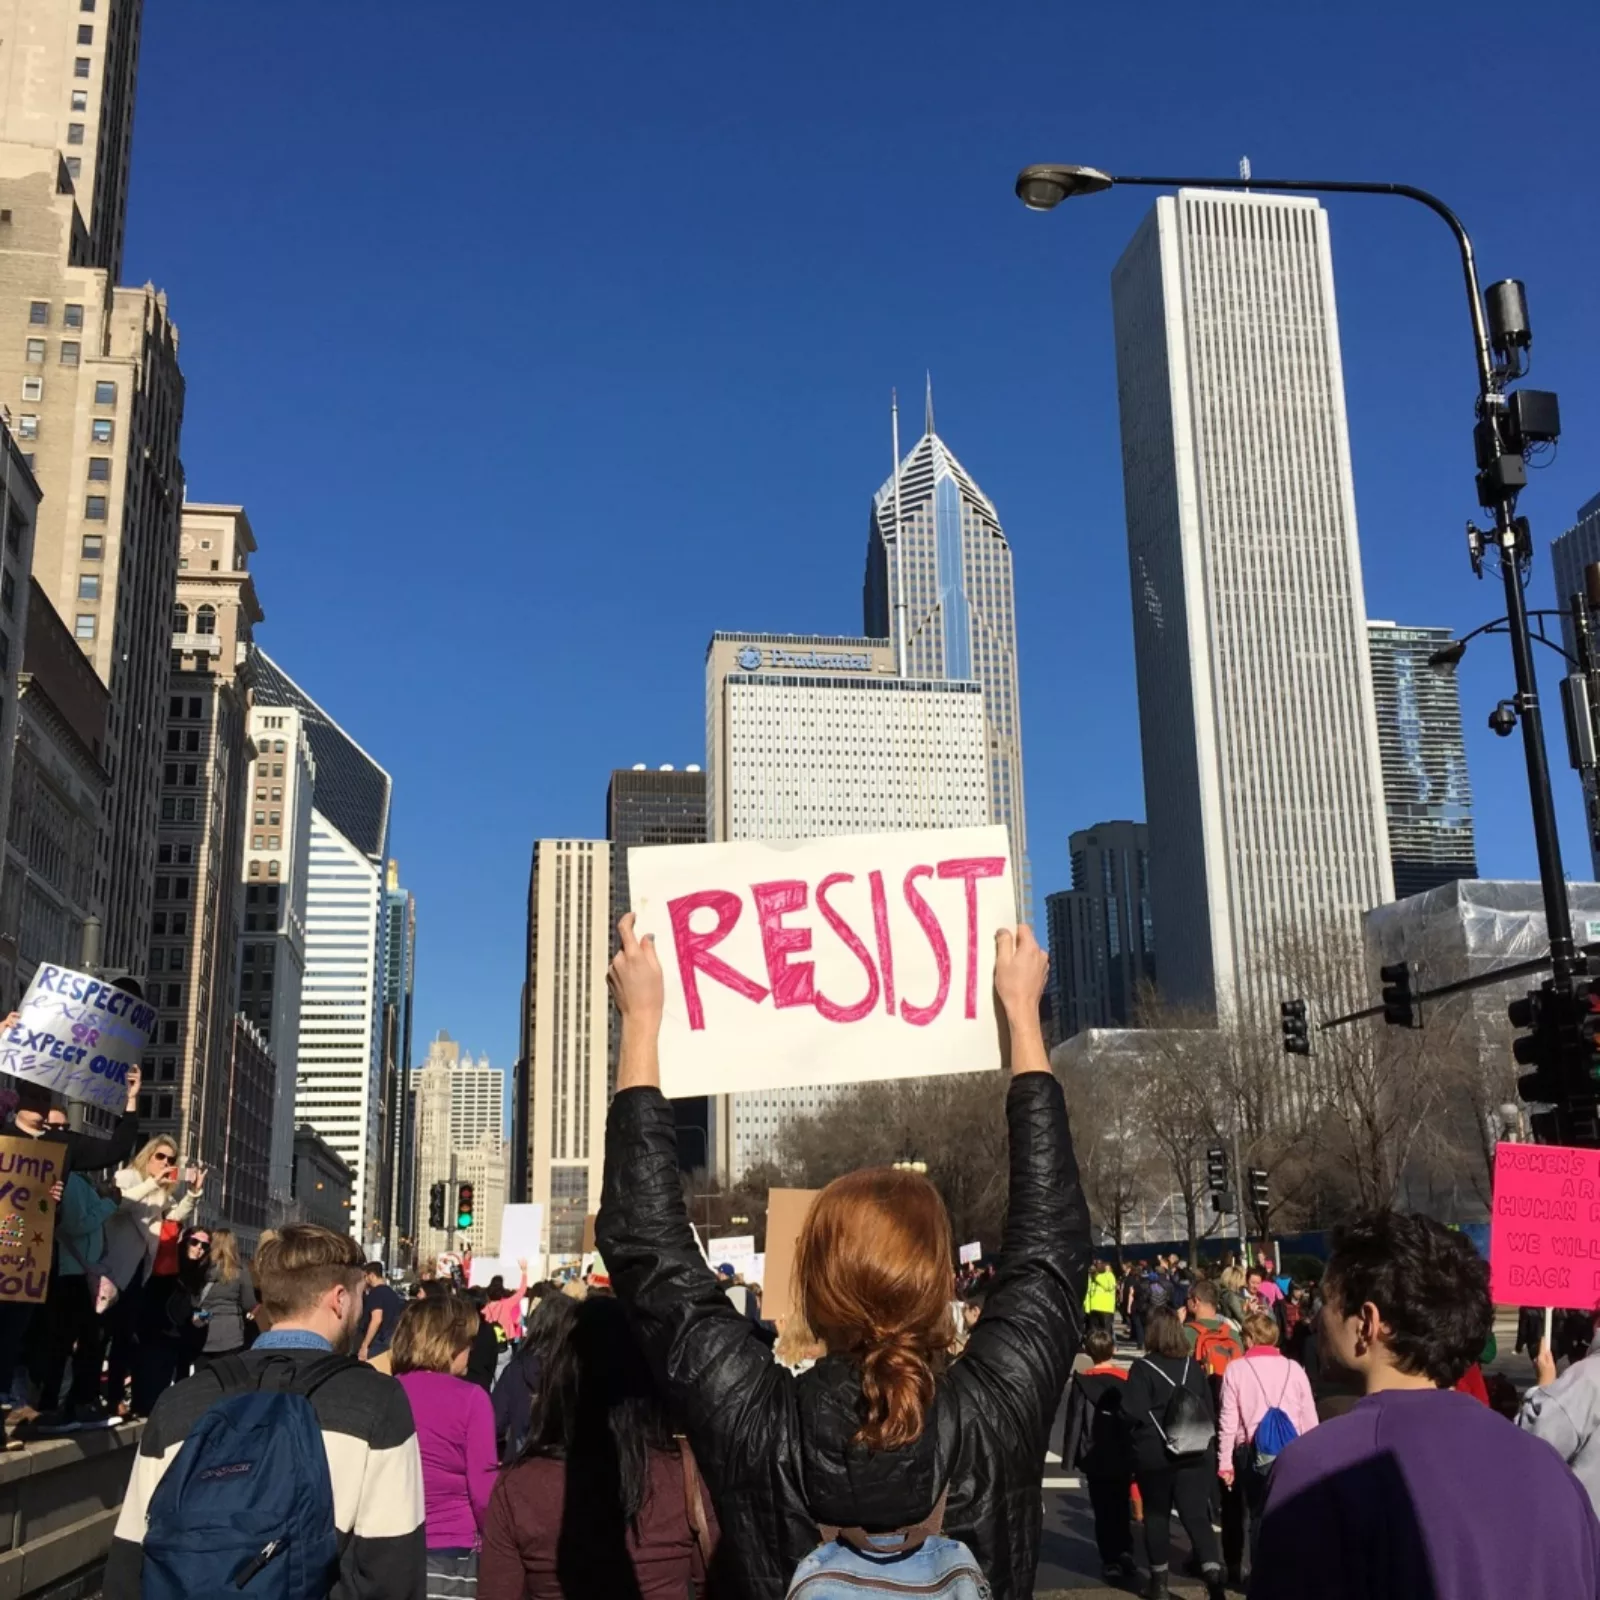 Protester holding a sign that reads "RESIST"